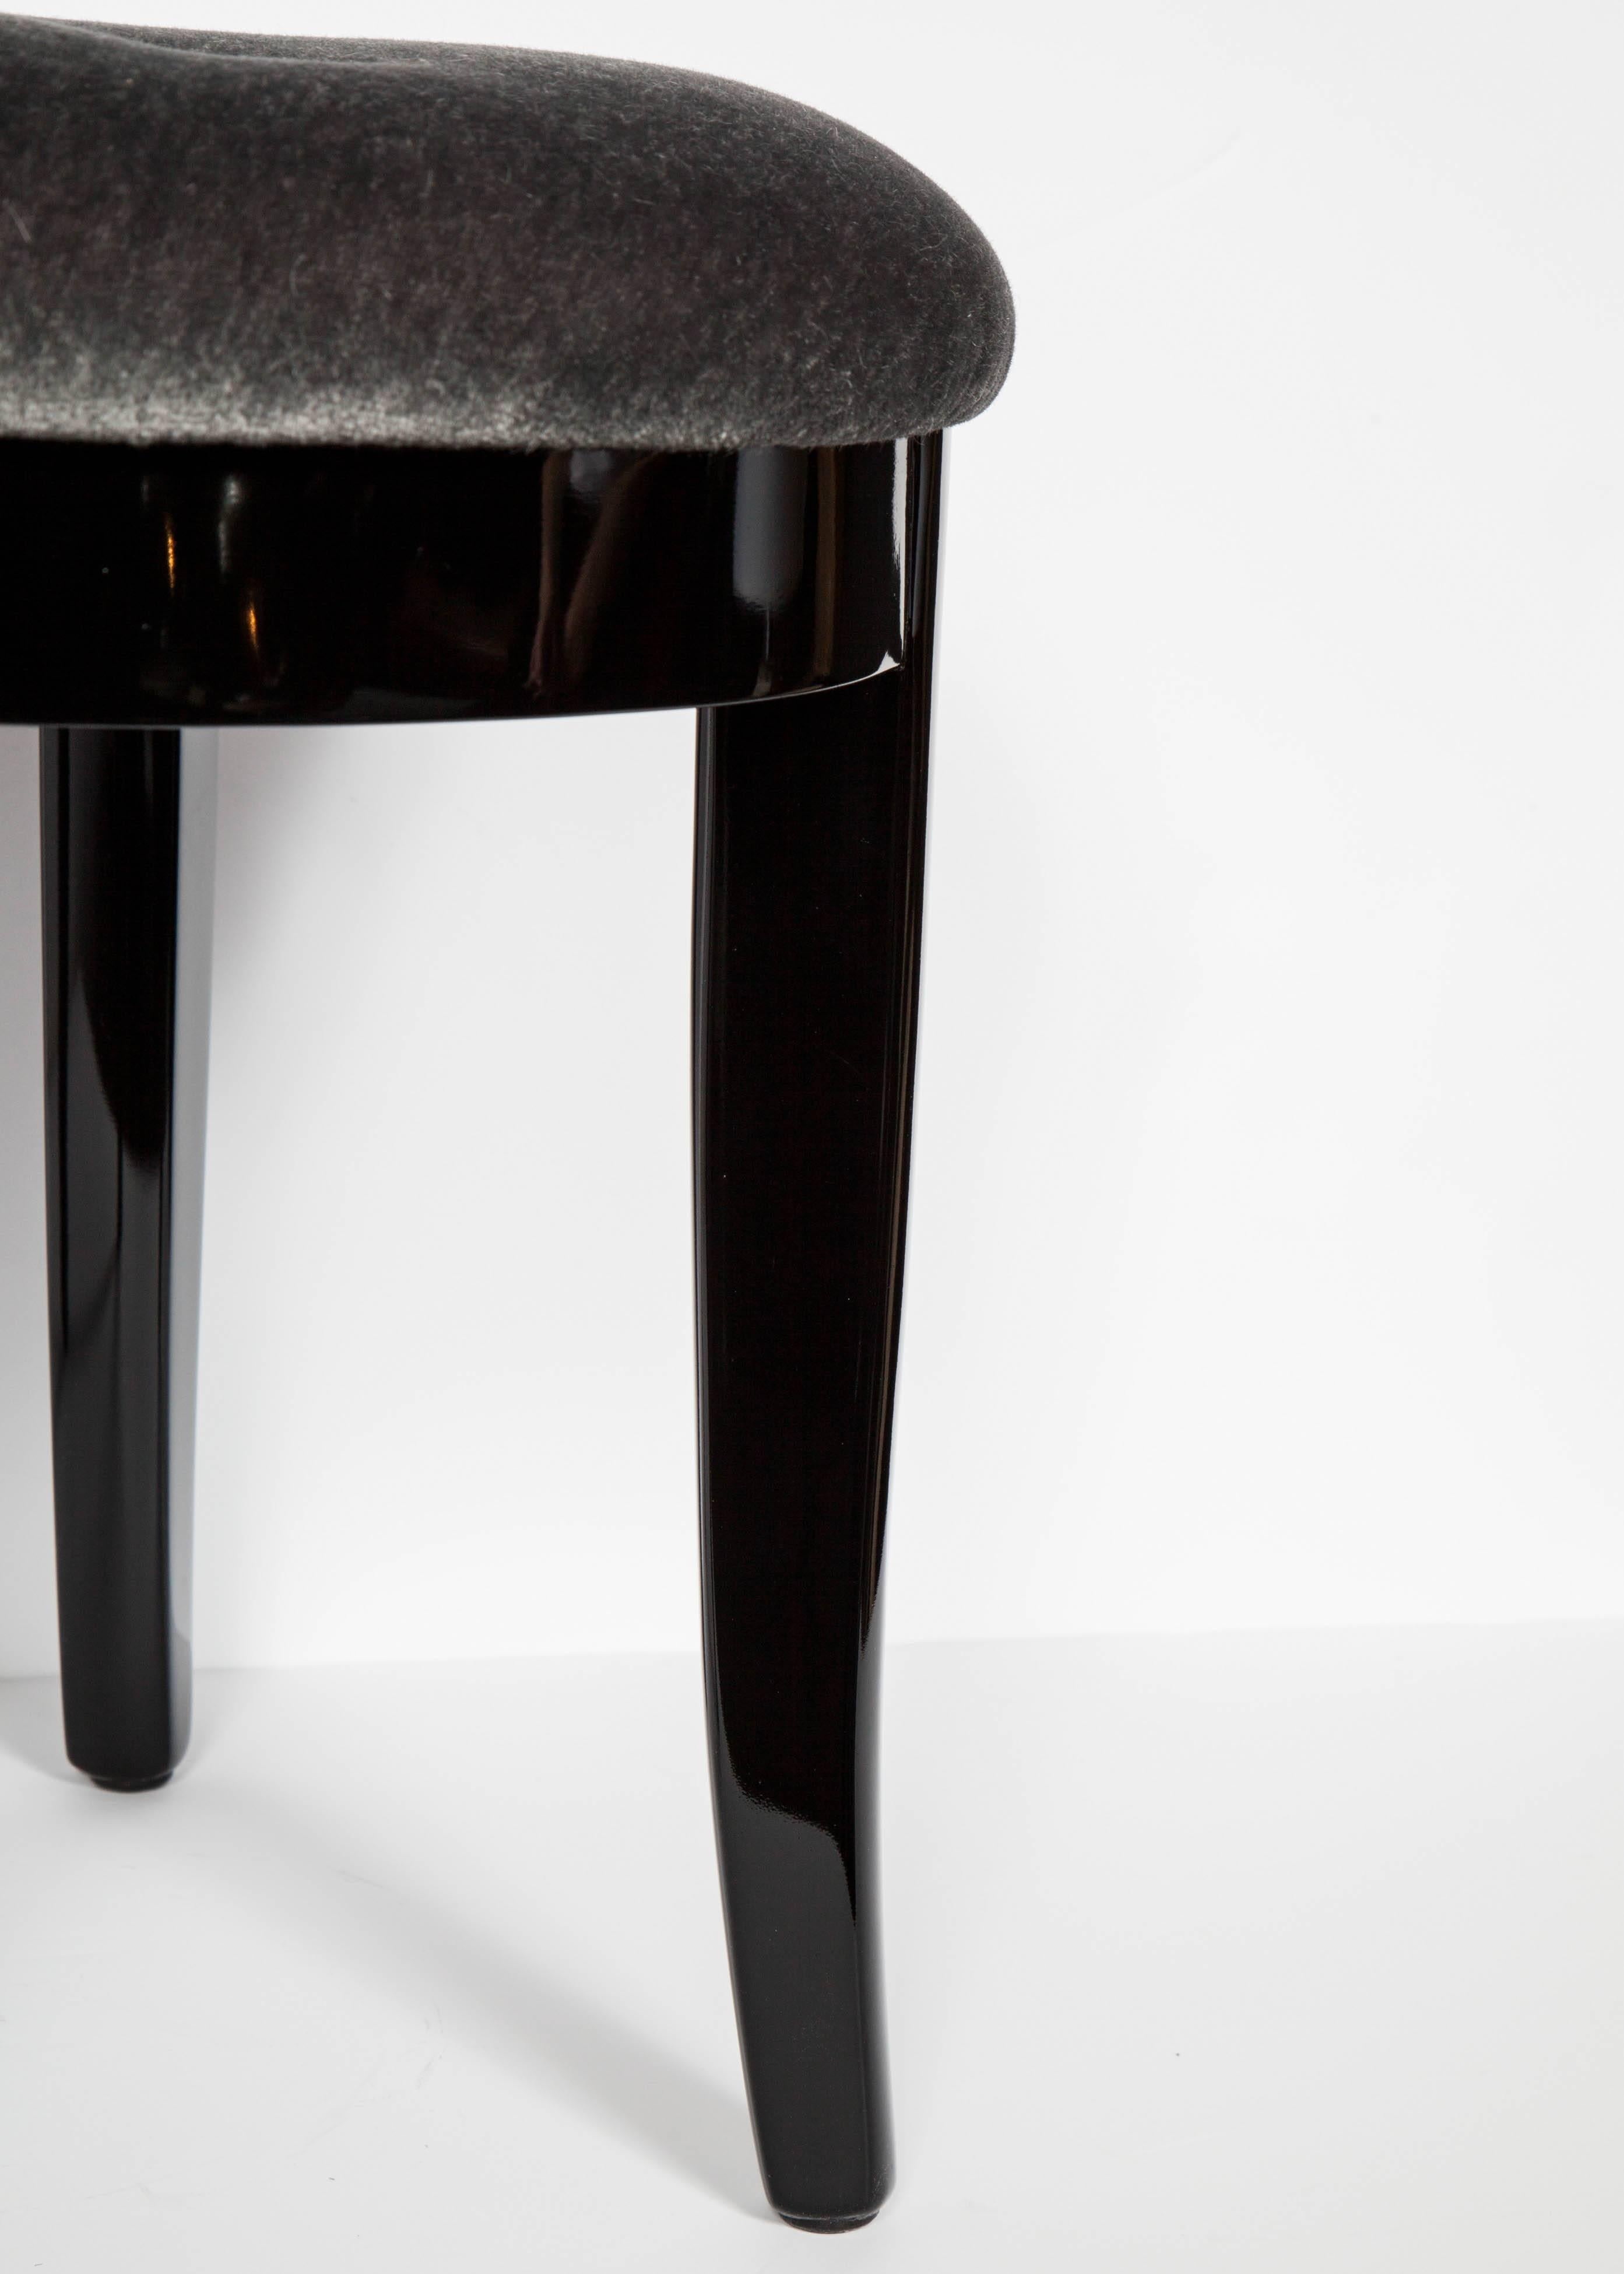 American Elegant Art Deco Vanity Stool in Black Lacquer and Grey Mohair